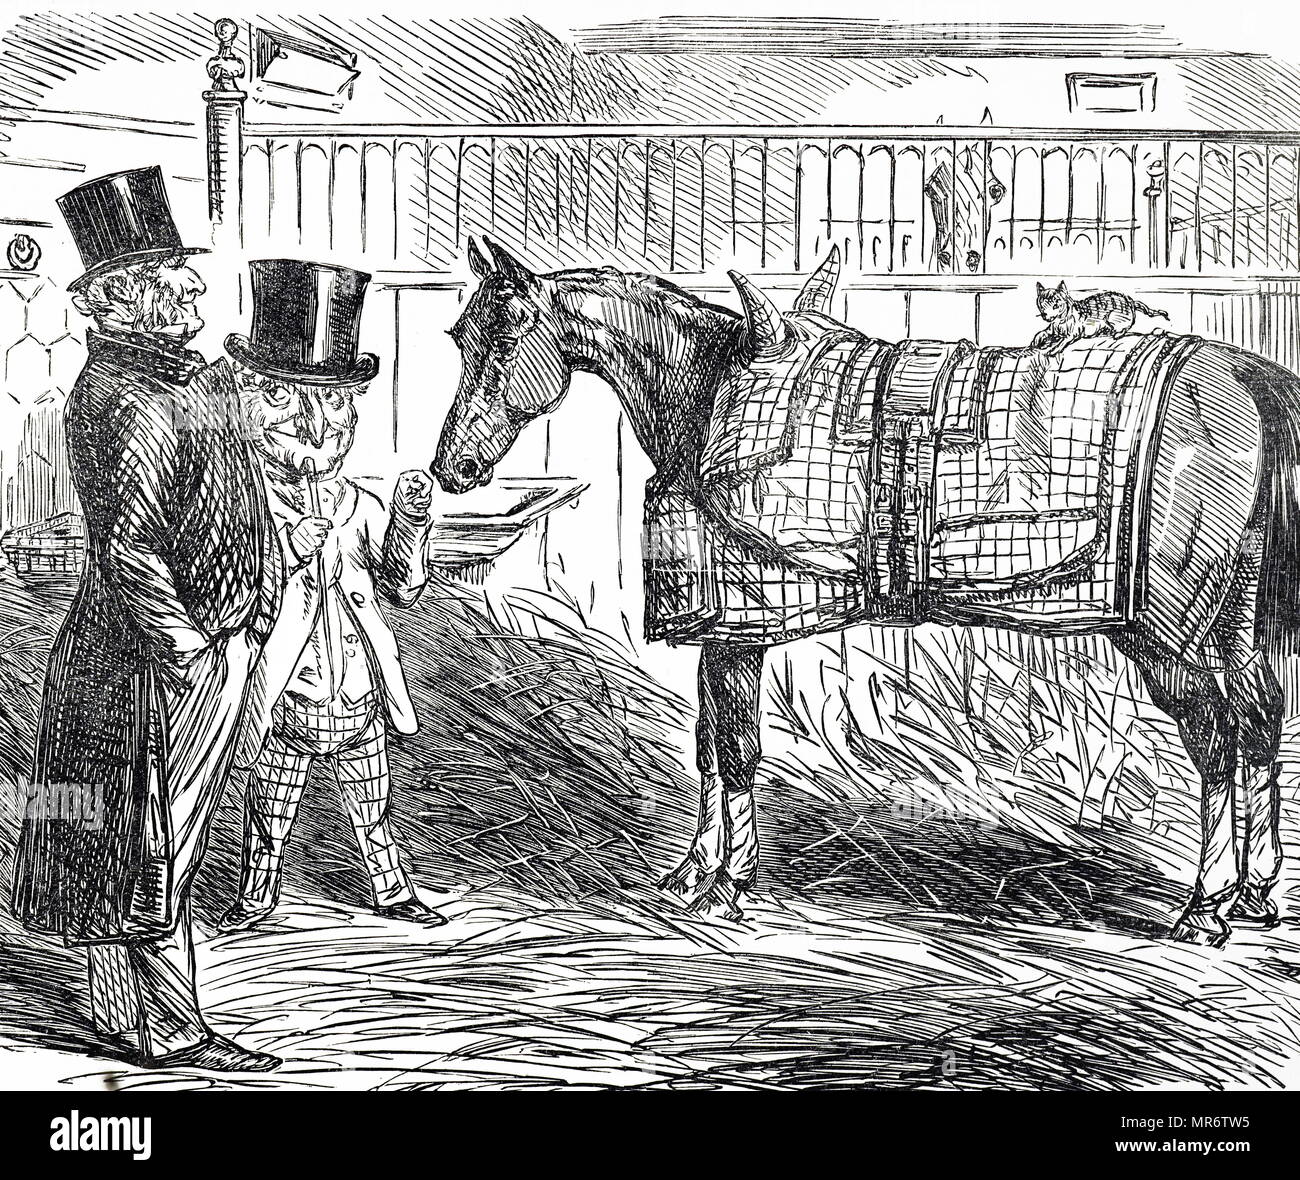 Cartoon titled 'The Cottage and The Stable'. The cartoon was commenting on the living conditions of agricultural workers compared with provisions made for horses. Illustrated by John Leech (1817-1864) an English caricaturist and illustrator. Dated 19th century Stock Photo